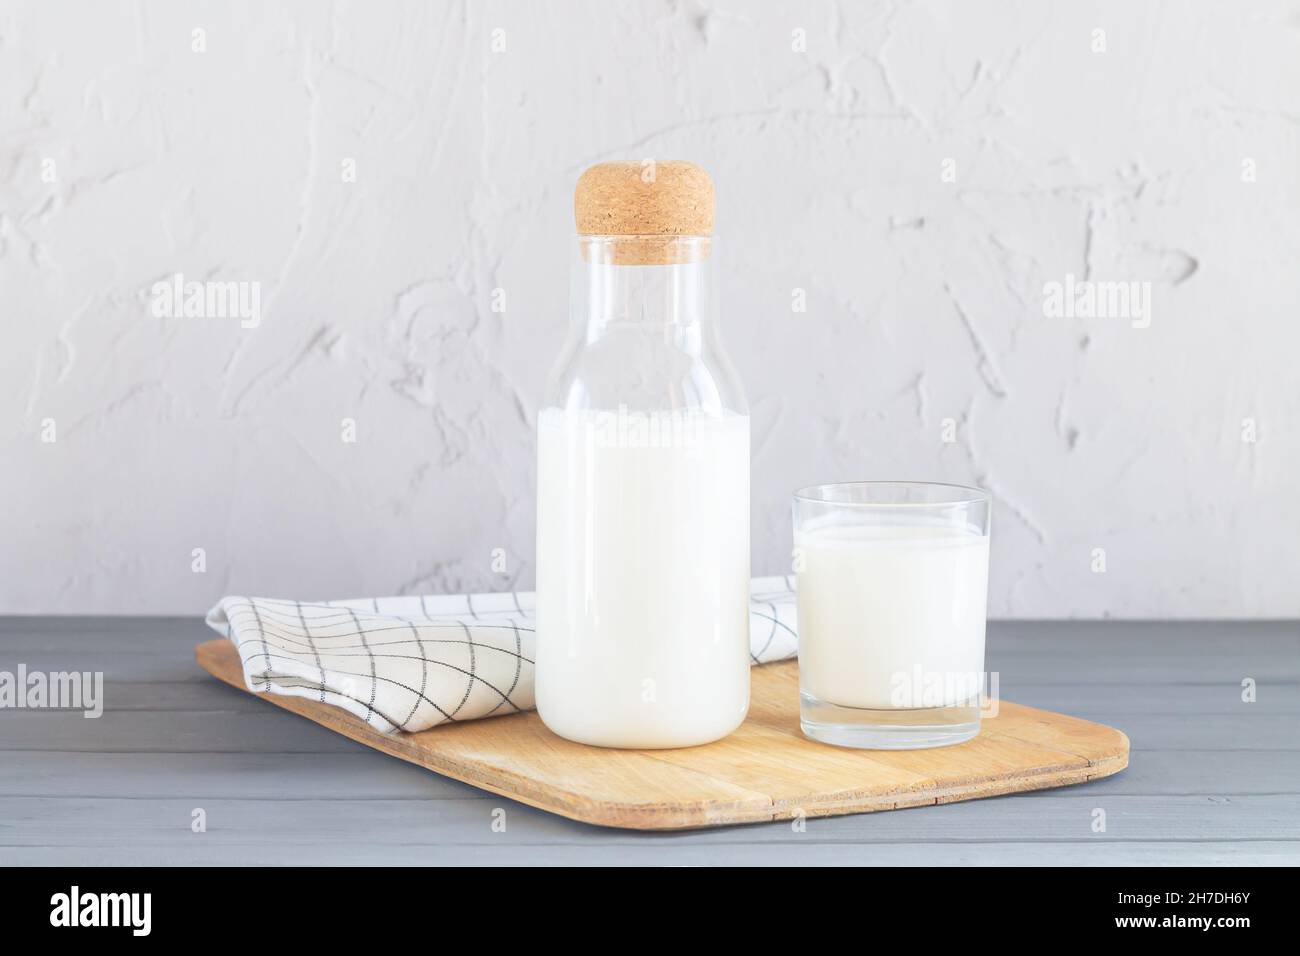 Glass jar with cork of homemade yogurt, kefir, buttermilk or natural fermented milk next to glass of milk on kitchen table. Healthy probiotic dairy dr Stock Photo